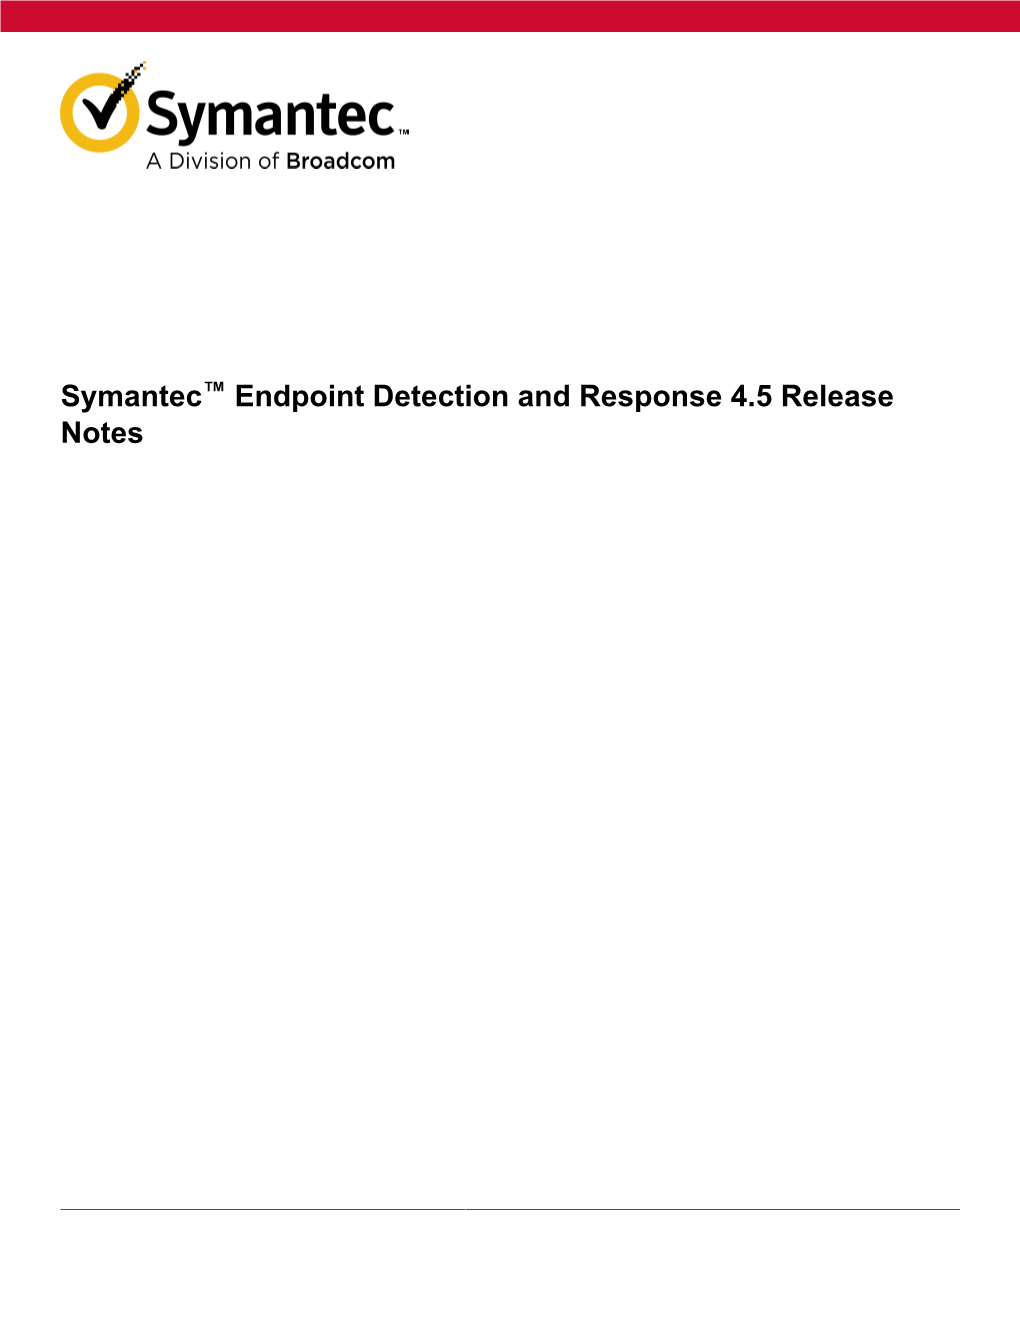 Symantec™ Endpoint Detection and Response 4.5 Release Notes